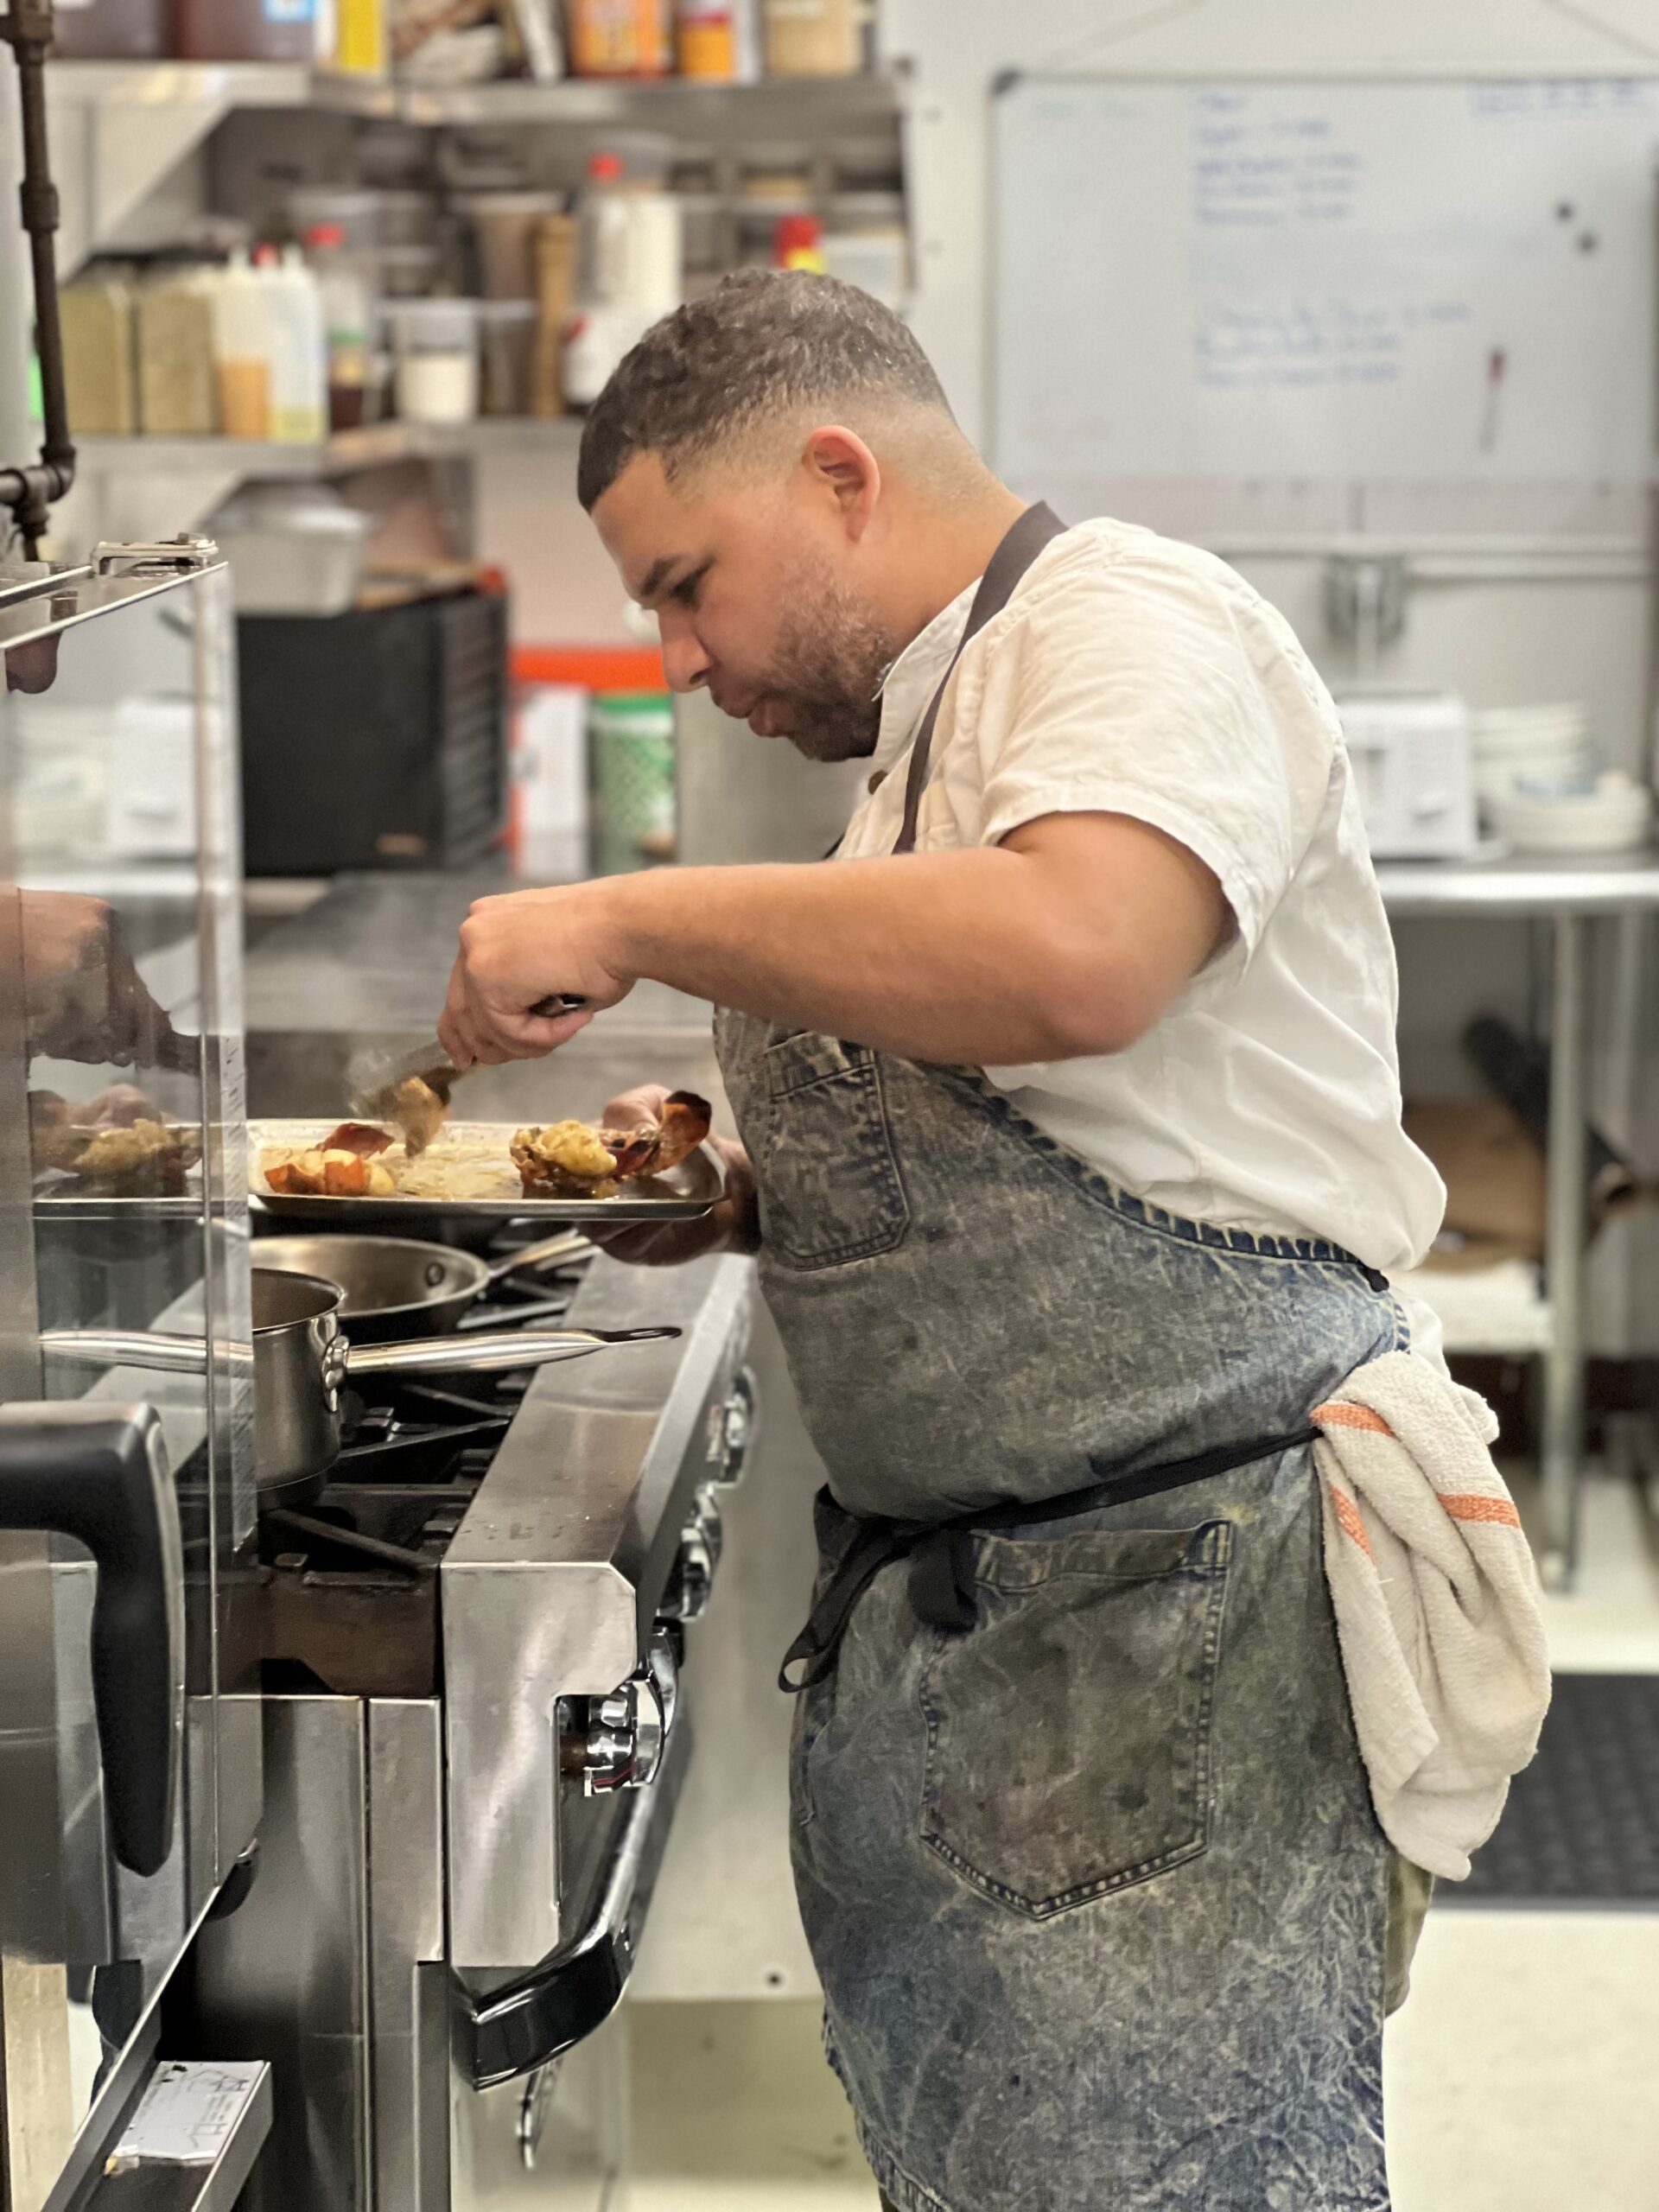 Chef Dominick Lee created upscale Creole cuisine on February 24 and 25 at Rosie's in Amagansett as part of The Roundtree’s winter culinary series. The New Orleans native will open his first New York restaurant, Alligator Pear, this spring. ELIZABETH VESPE